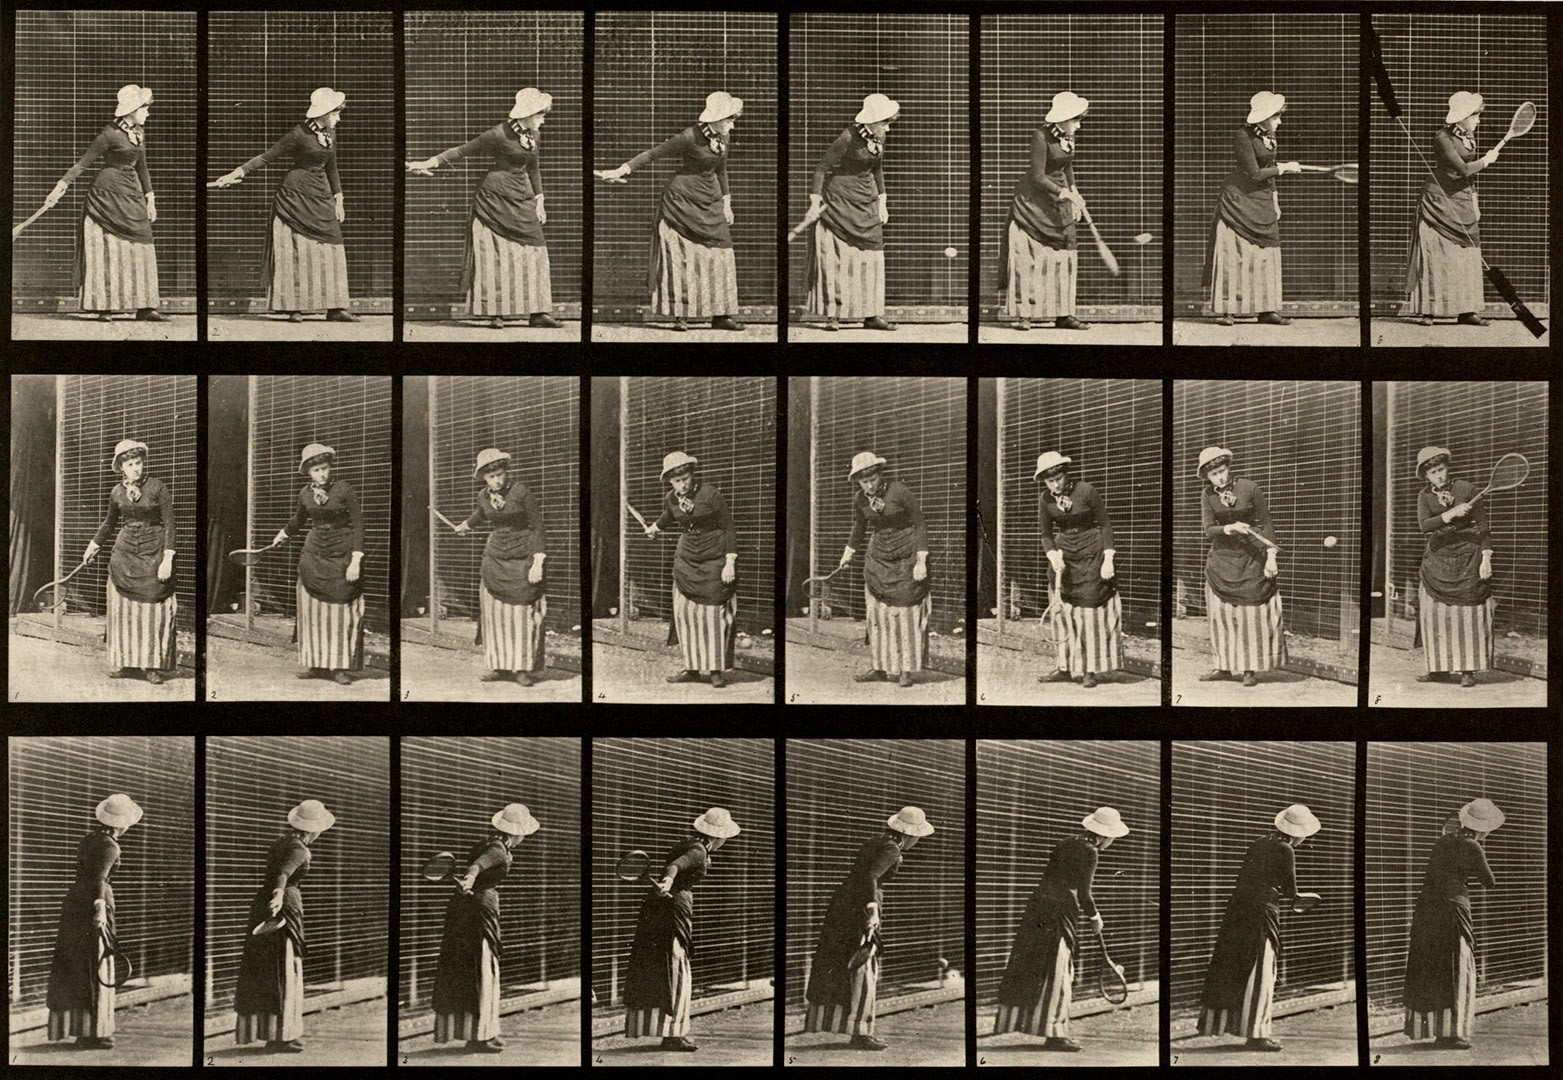 Sequence of black and white photos showing the movements of a woman serving in a lawn tennis game